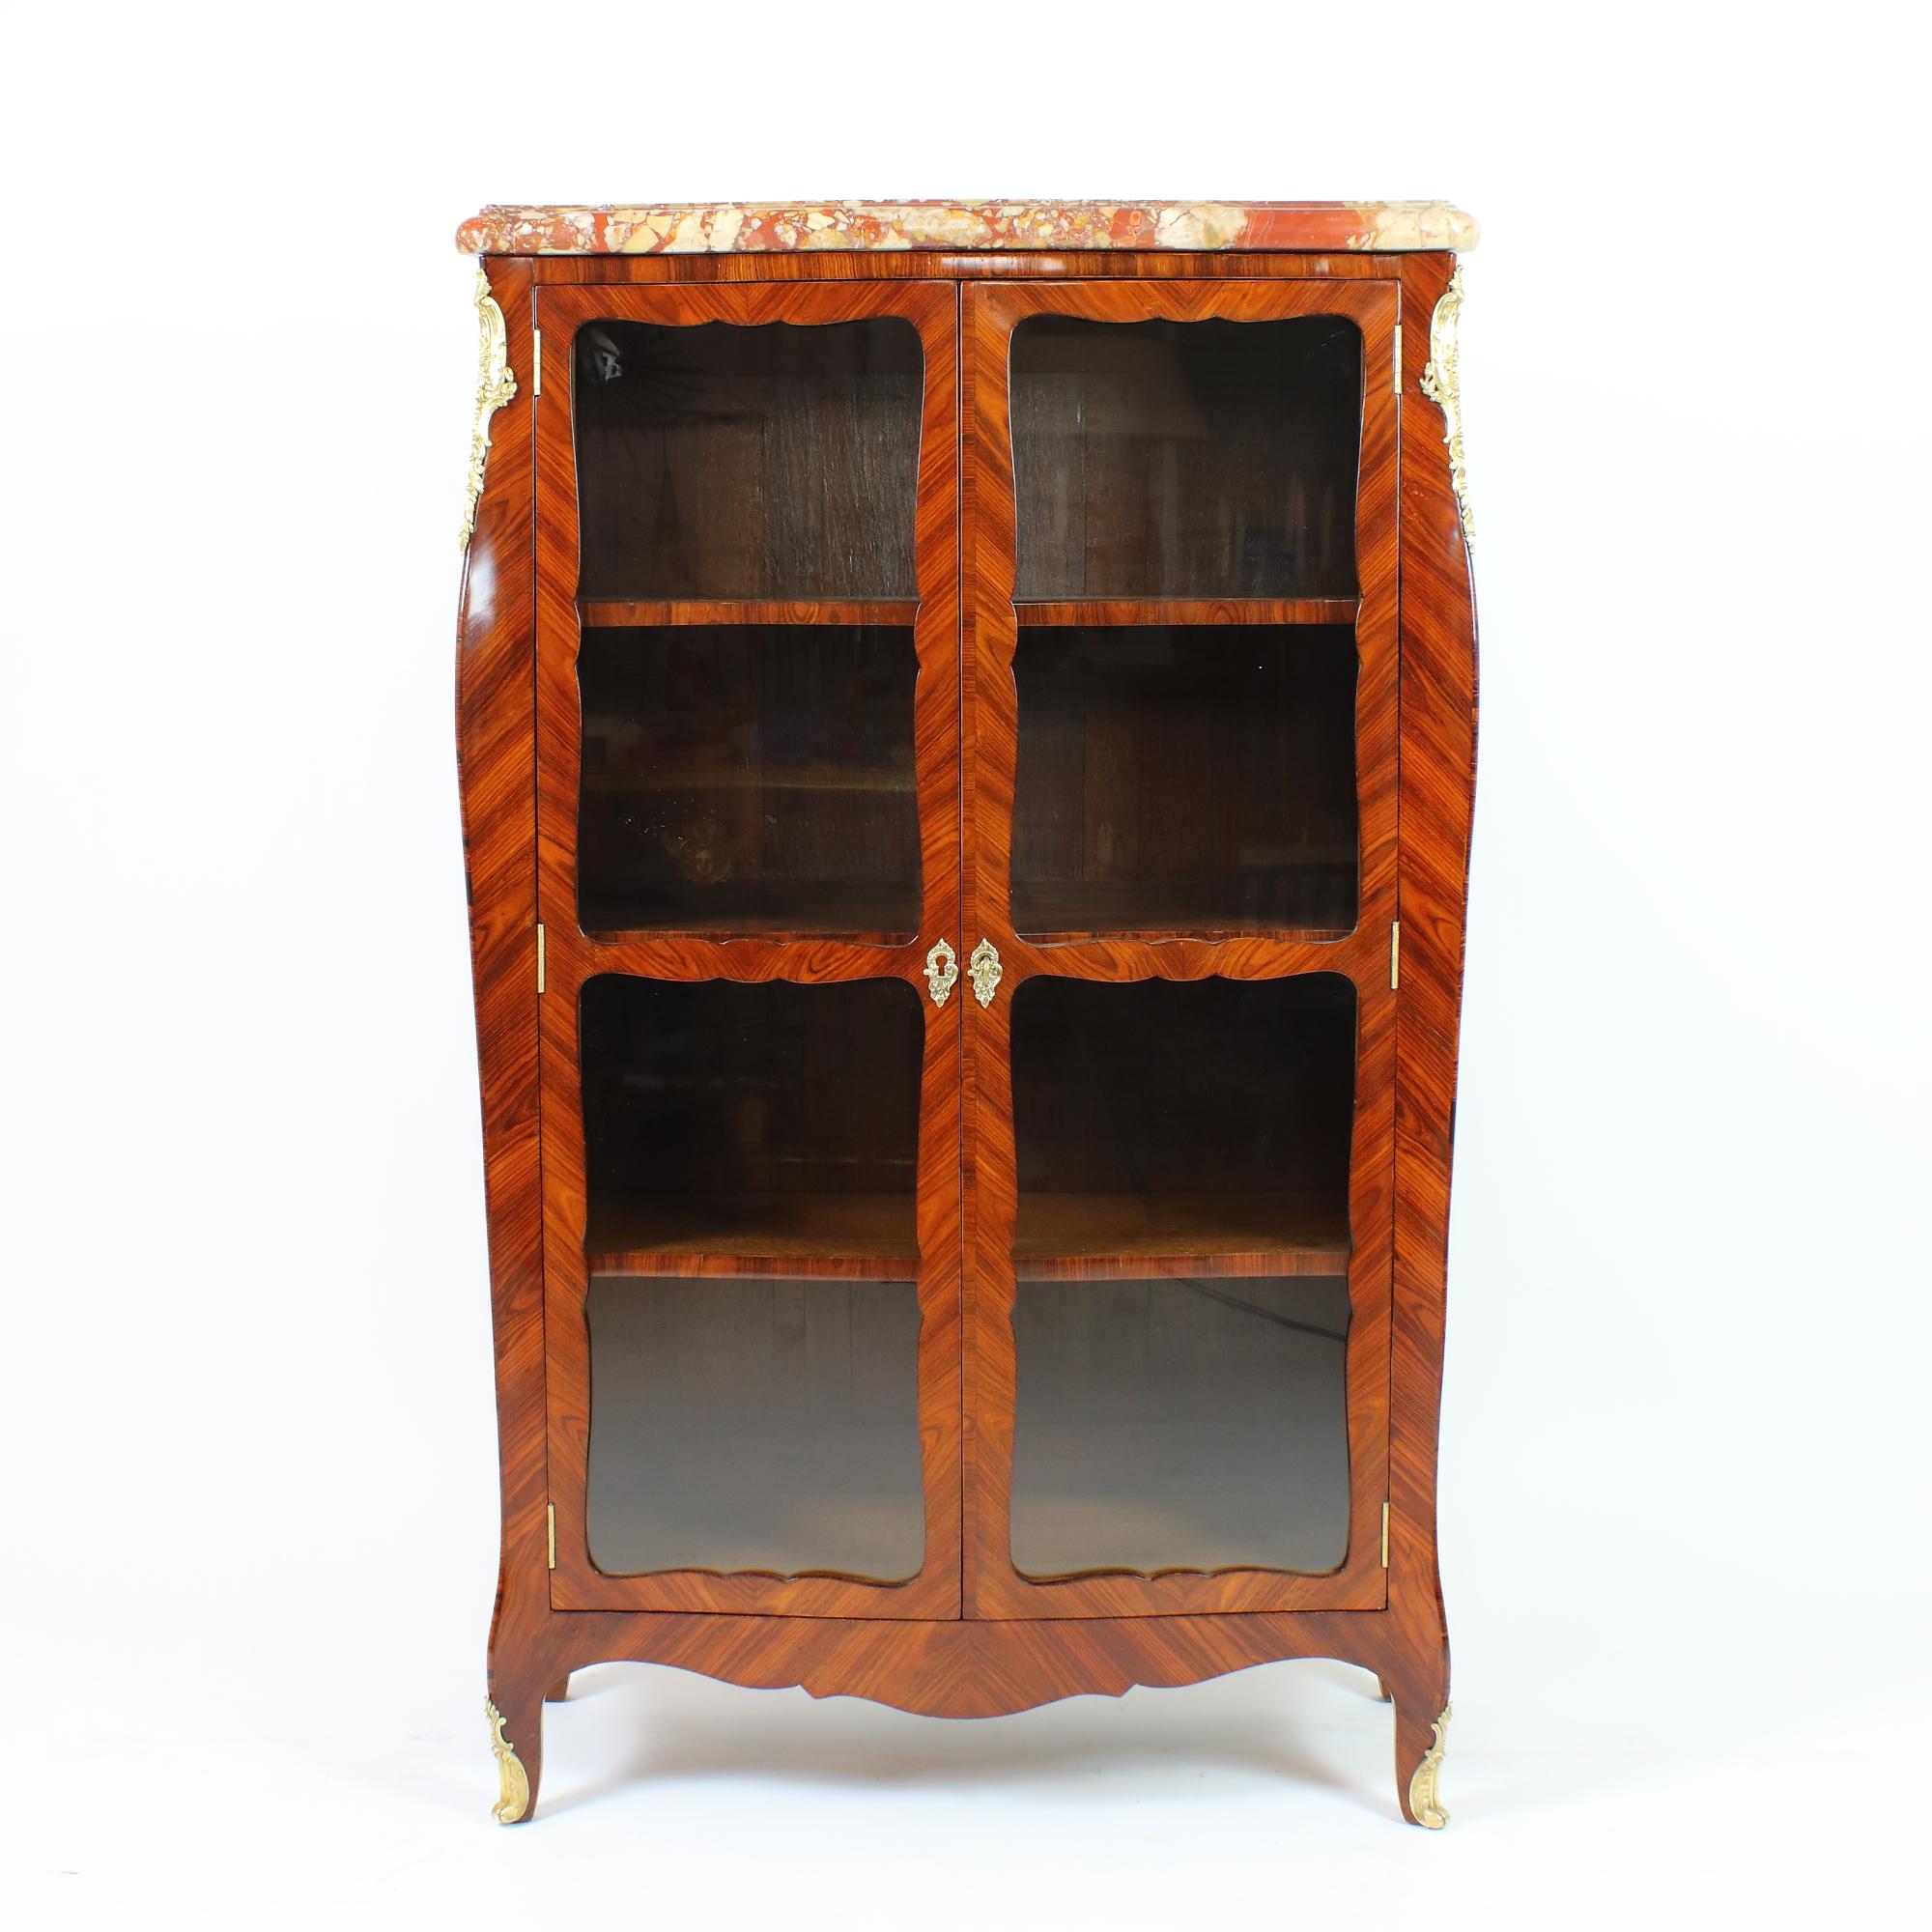 18th century French Louis XV small Marquetry bookcase or Vitrine

Rectangular vitrine or bookcase standing on four cabriole feet, front and sides slightly curved, the angles pointedly extended. Mirrored marquetry on three sides. Two full-height